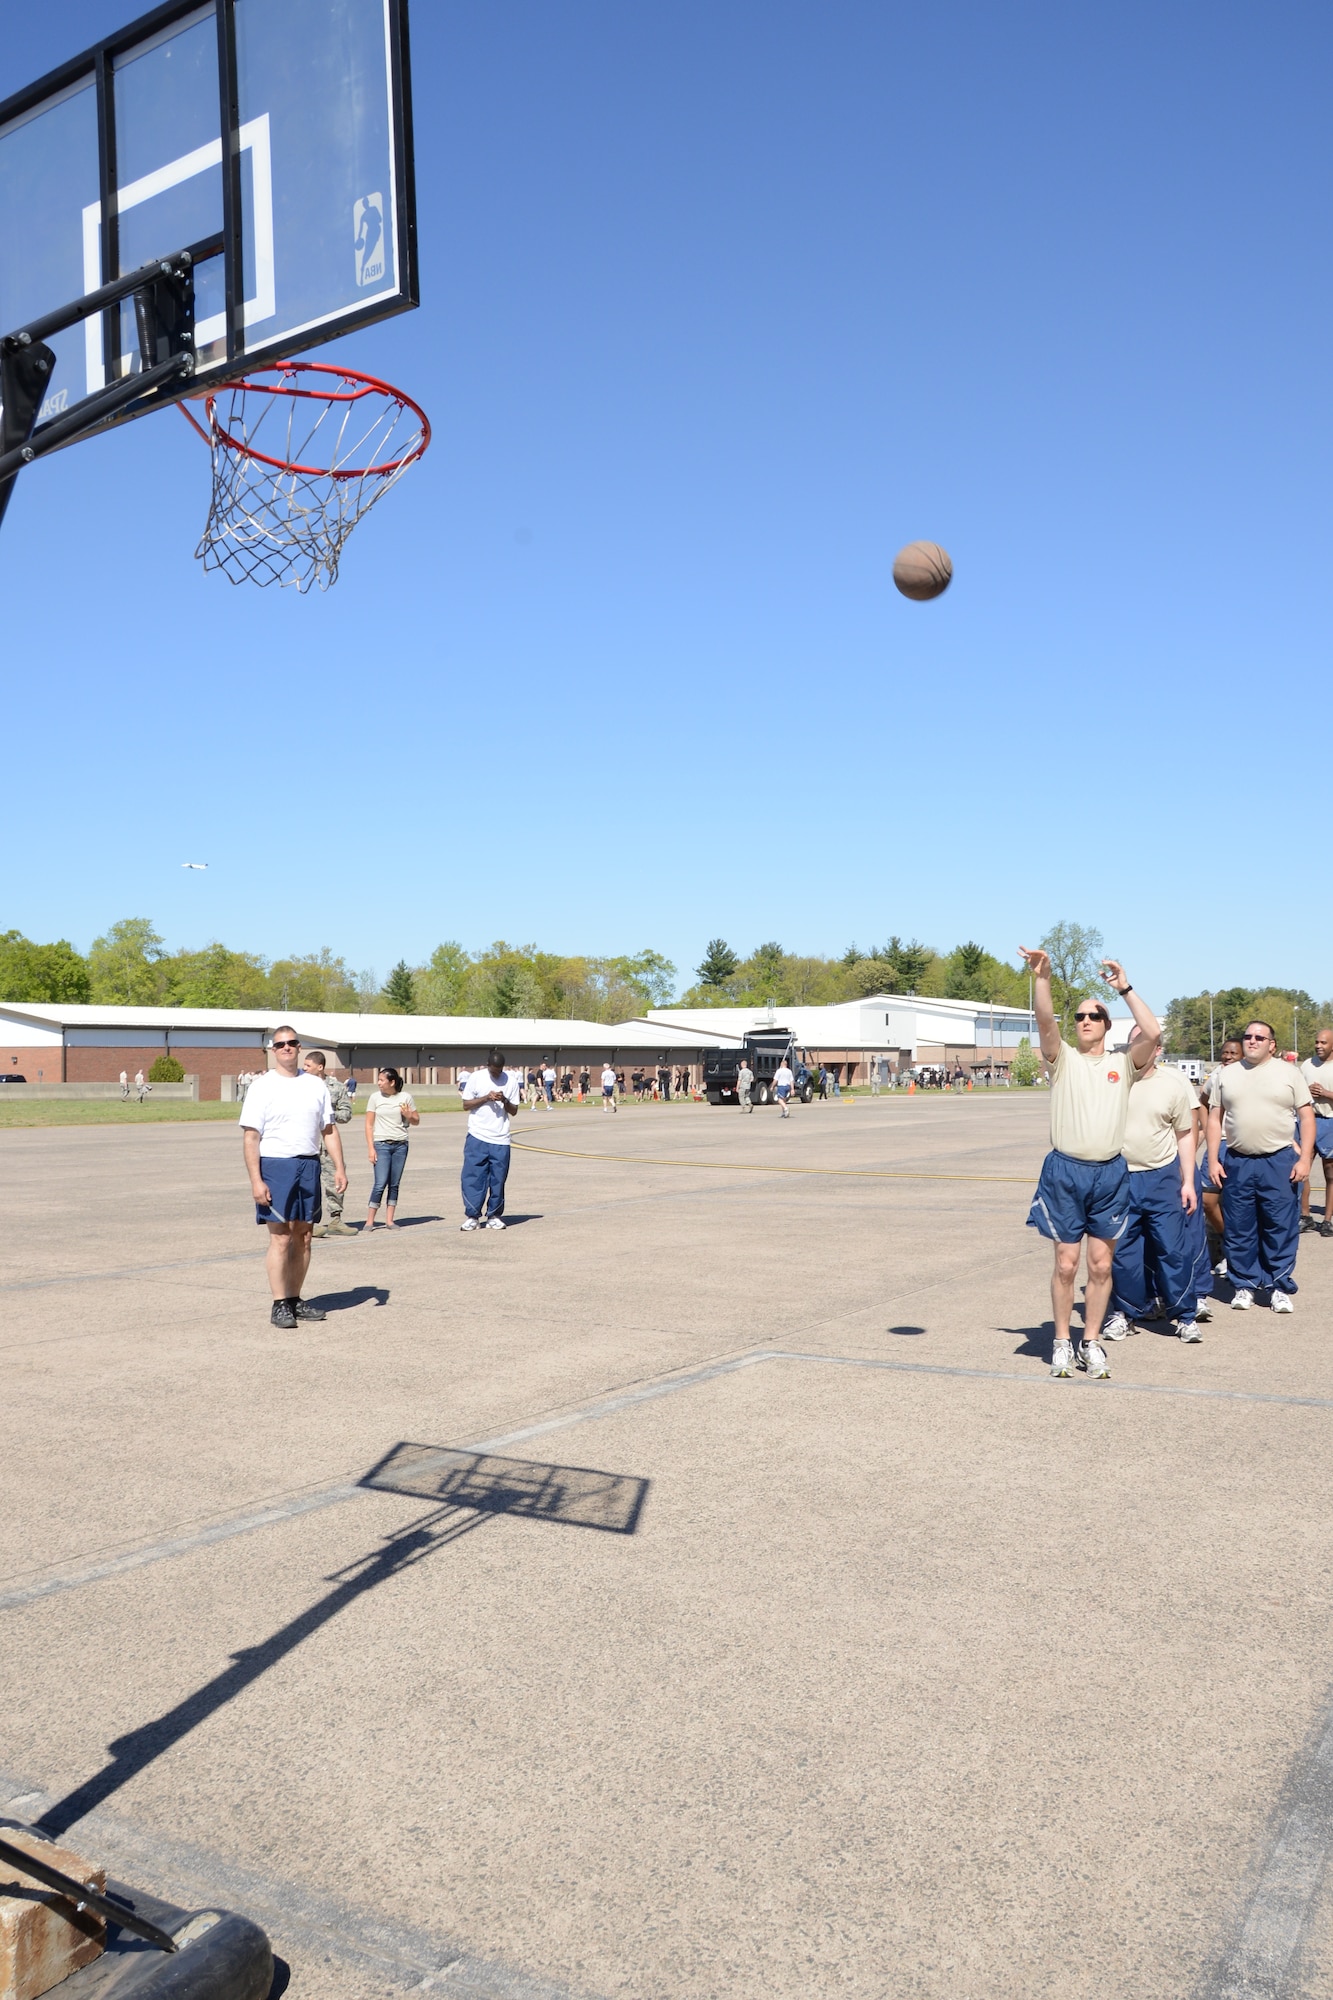 Contestants in the three-point basketball shoot bring their skills to the court (north apron) during the 103rd Airlift Wing’s first ever Warrior Day competition, May 4, 2013, at Bradley Air National Guard Base in East Granby, Conn. The competition consisted of many events from a truck pull and three-point basketball shoot out to a litter carry and a 50-yard “crab –dash”. The competition aimed to promote physical fitness and esprit de corps within the 103rd Airlift Wing. (U.S. Air National Guard photo by Sen-ior Airman Emmanuel Santiago/Released)